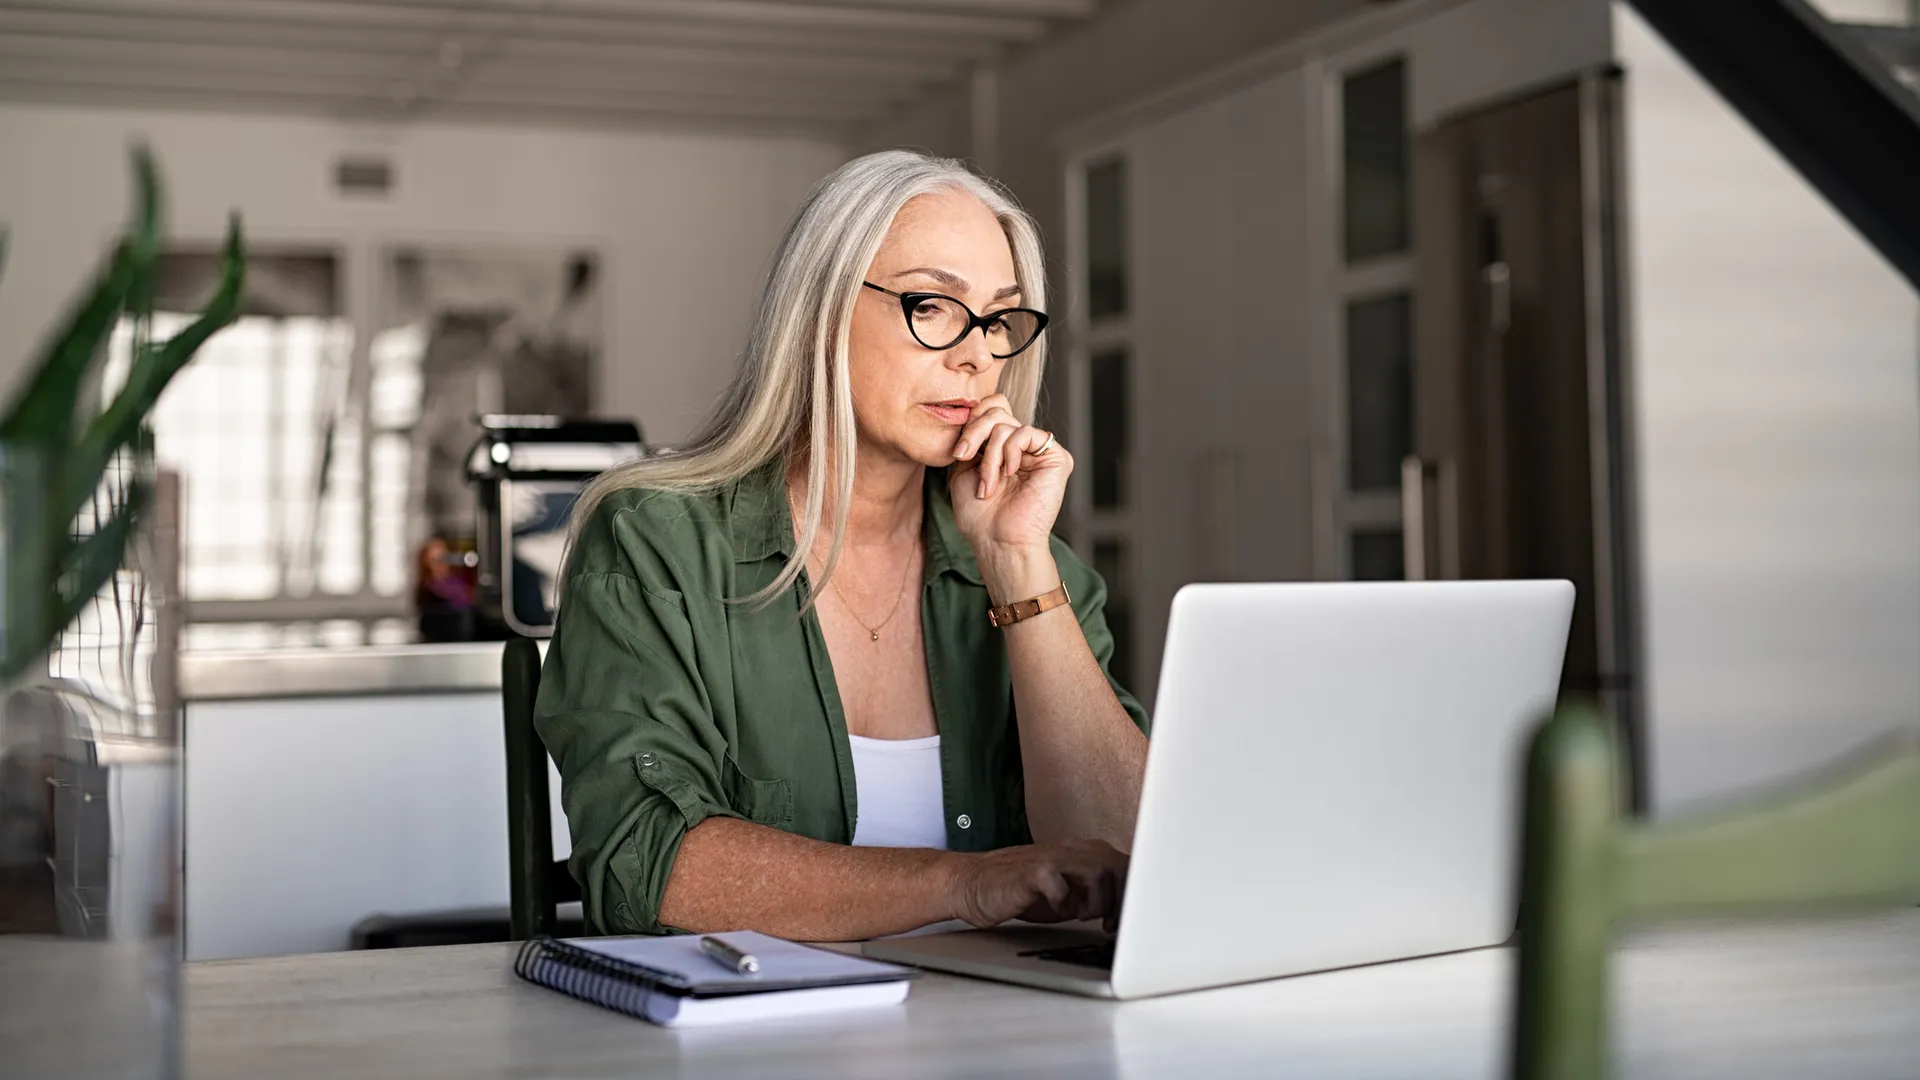 Focused old woman with white hair at home using laptop.